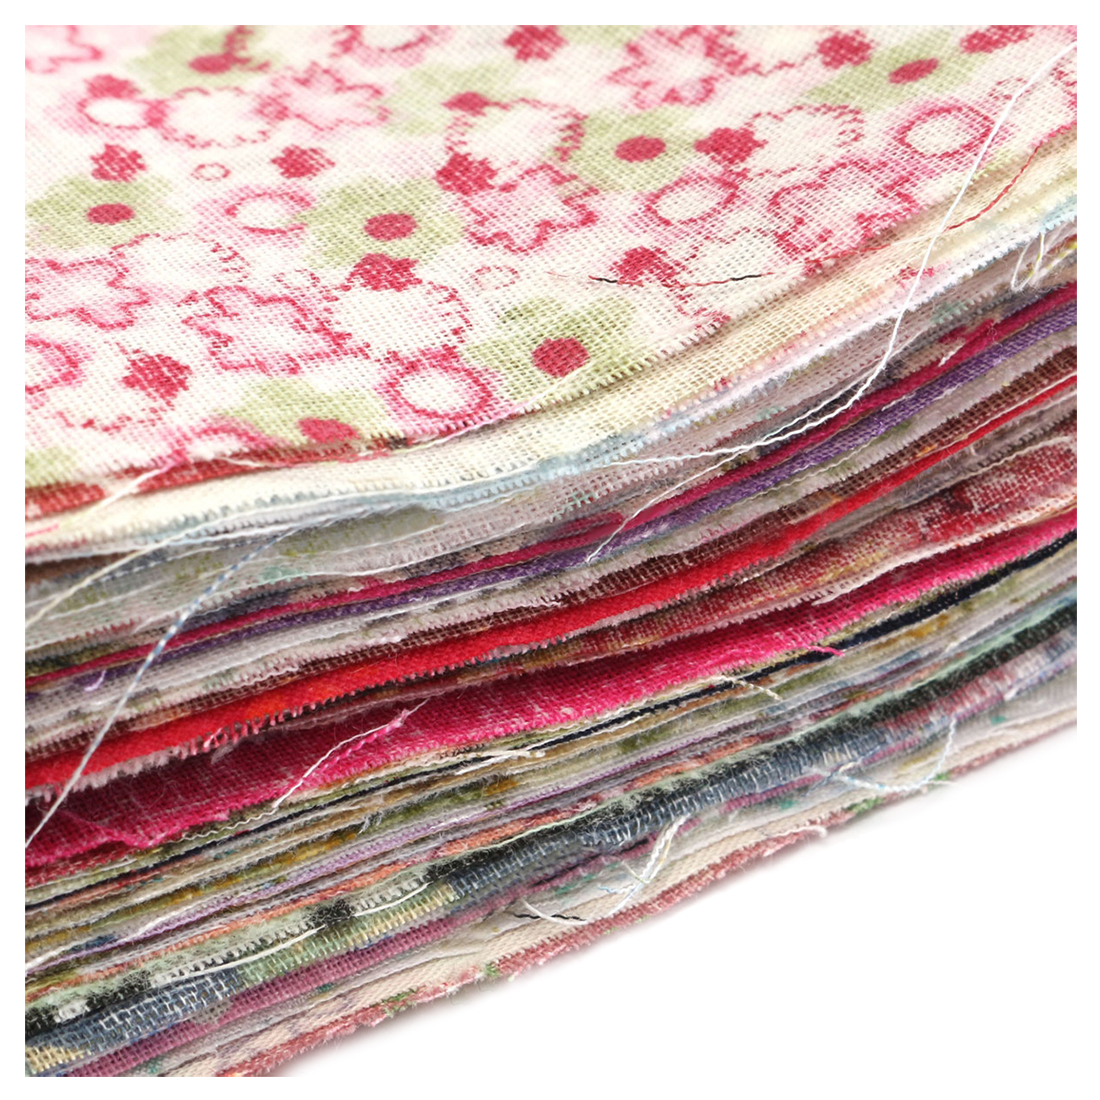 100Pcs 10x10cm Square Floral Cotton Fabric Patchwork Cloth For DIY Craft Sewing